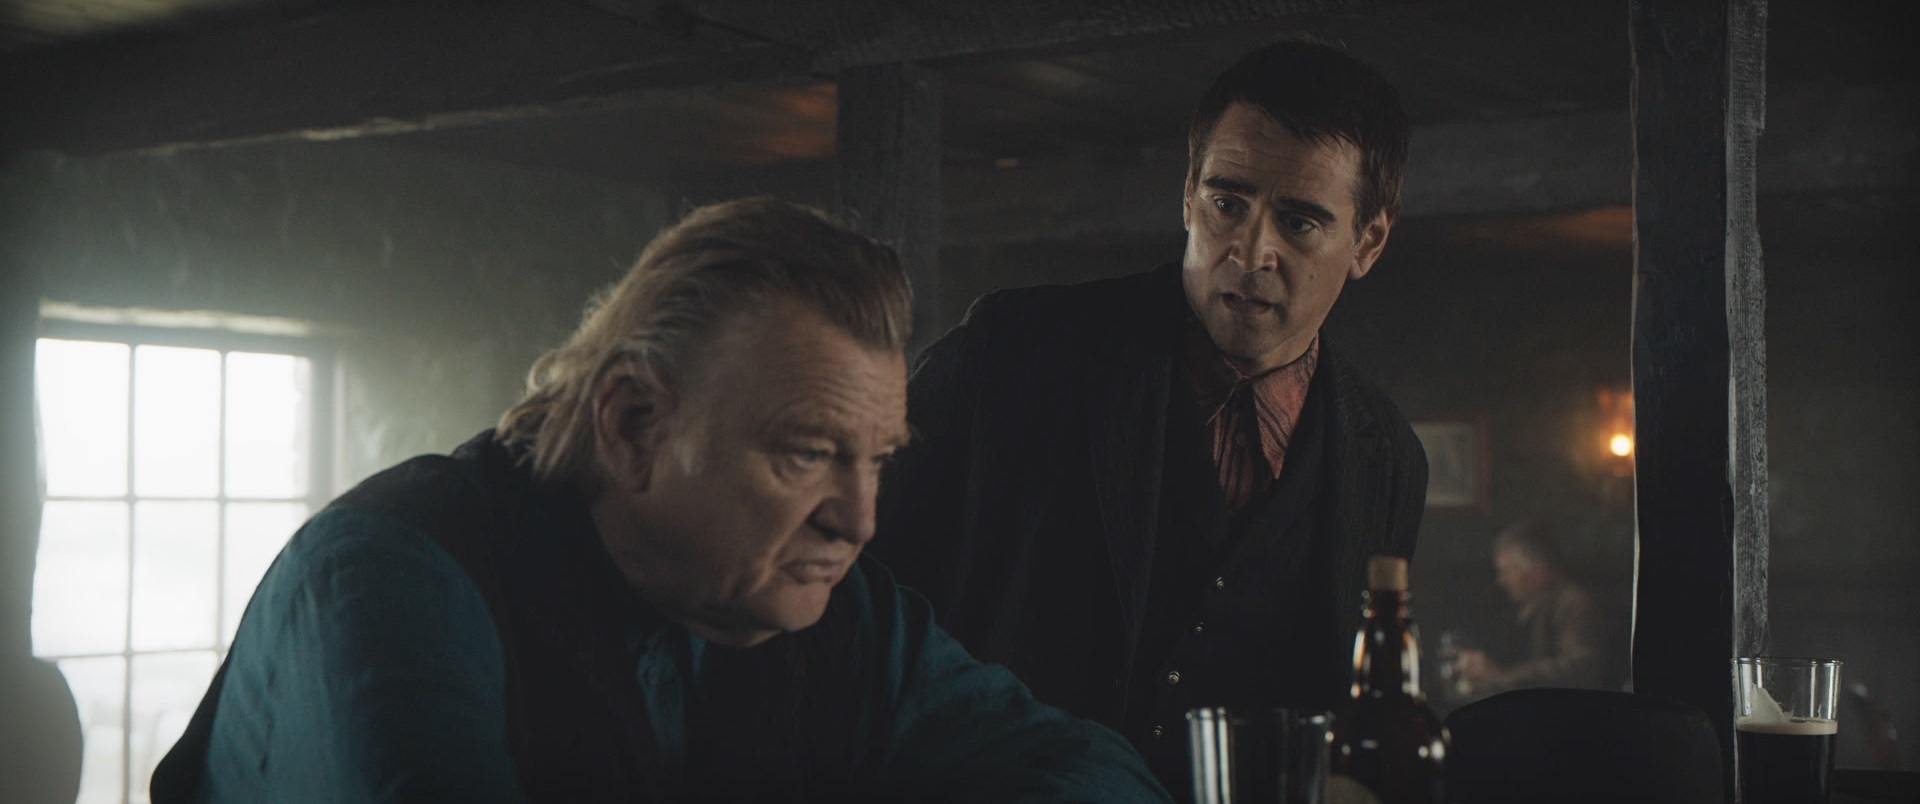 Brendan Gleeson and Colin Farrell in The Banshees of Innisherrin, nominated for nine Oscars . © 2022 20th Century Studios All Rights Reserved.